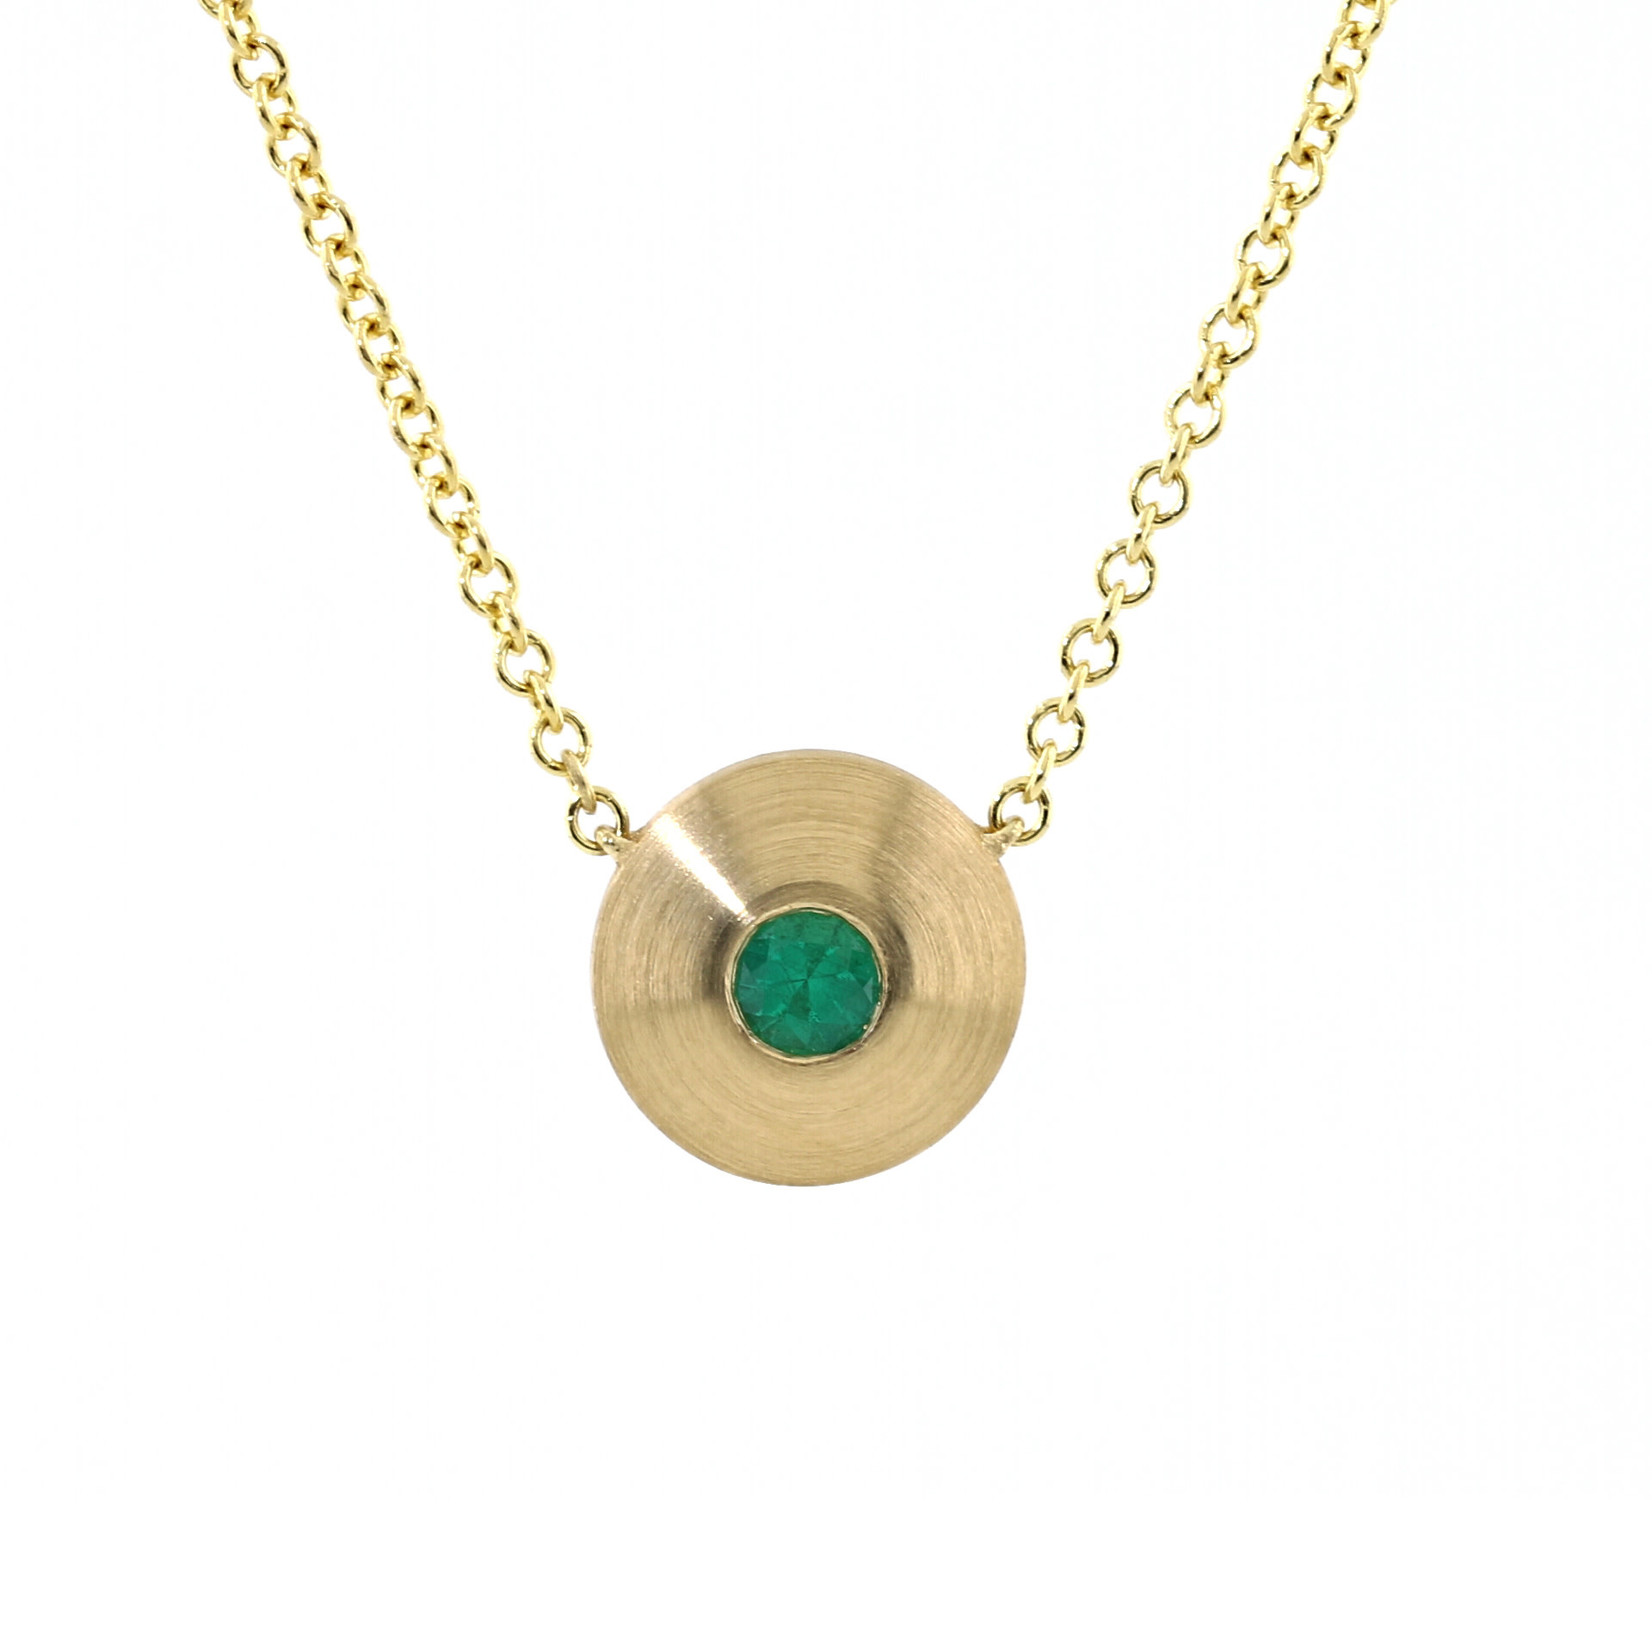 Baxter Moerman Large Cone Necklace with Emerald